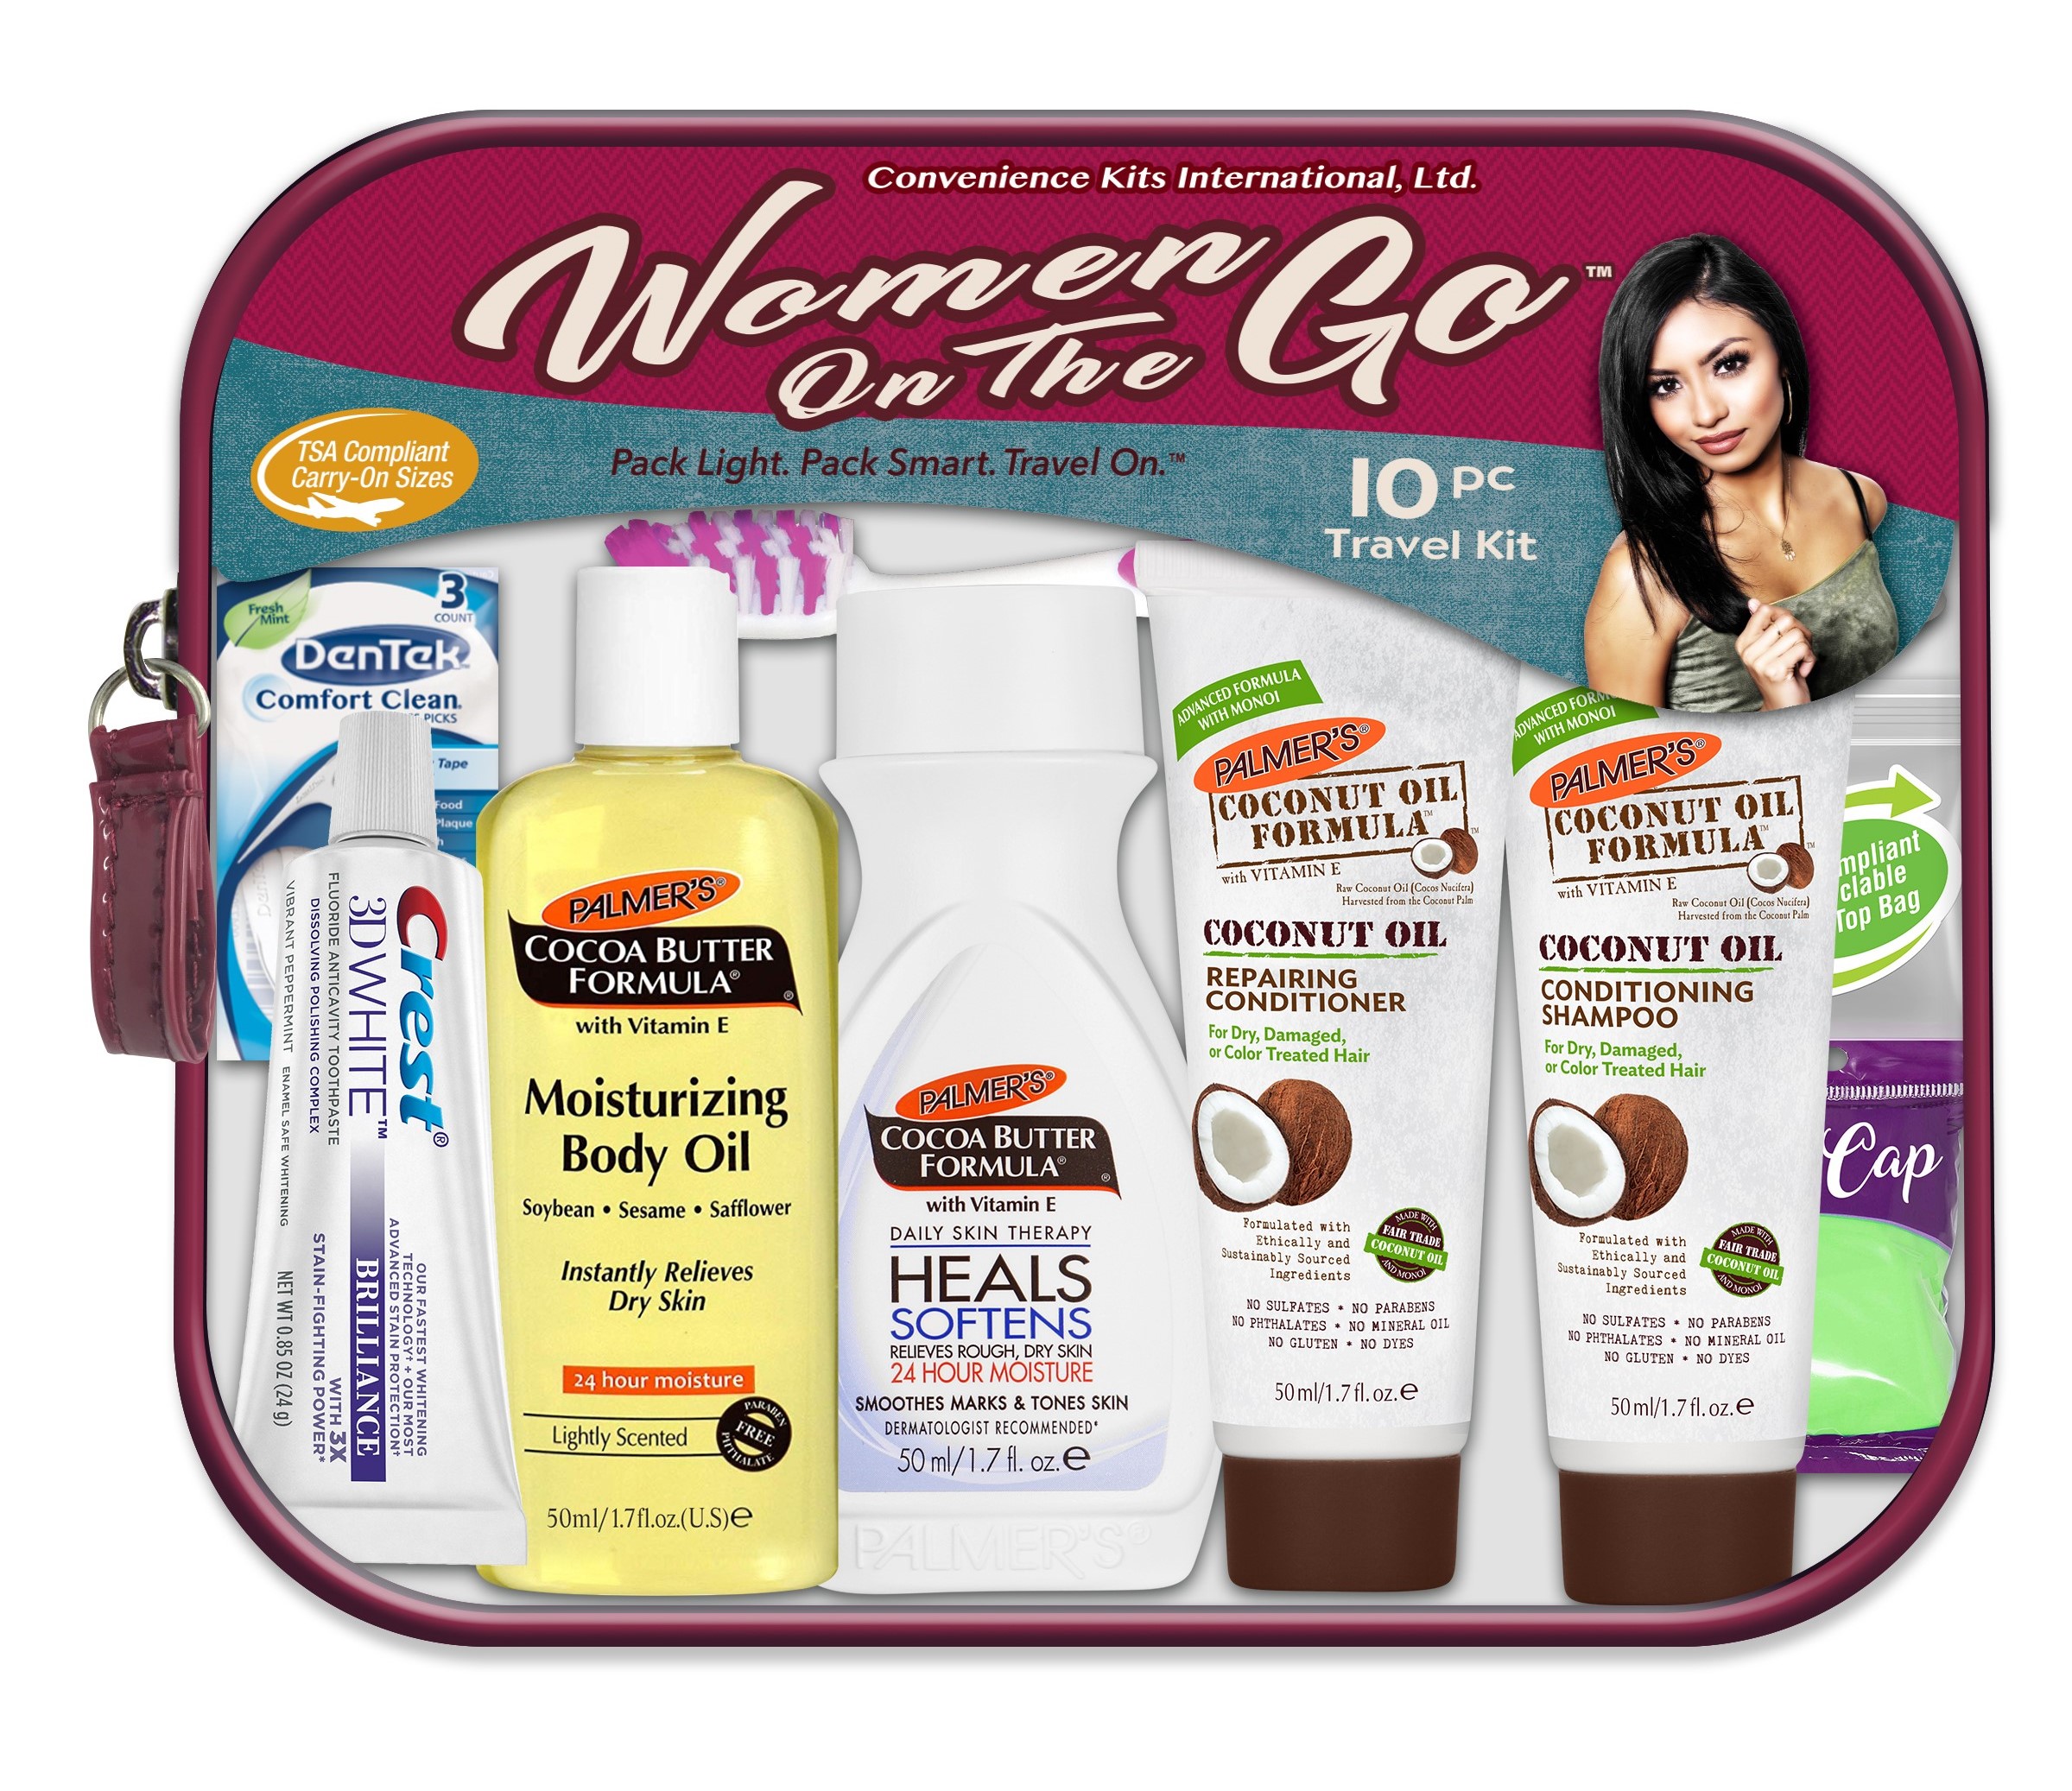 Convenience Kits International, Womens Multicultural 10 PC Kit Featuring: Palmers Hair and Body Care Trial-Size Products - image 1 of 2